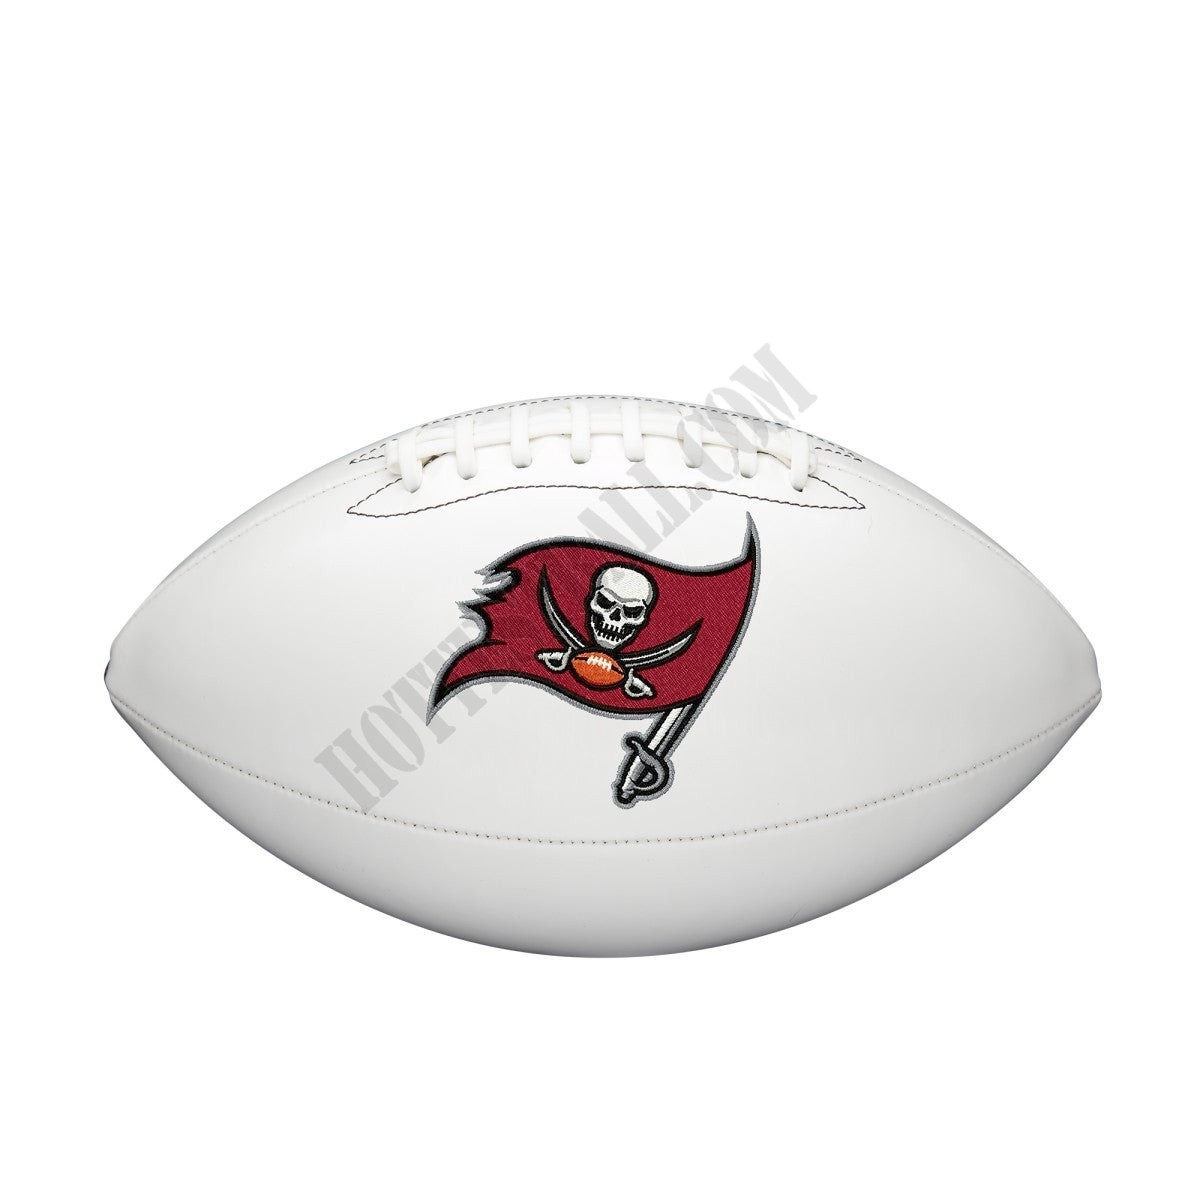 NFL Live Signature Autograph Football - Tampa Bay Buccaneers ● Wilson Promotions - NFL Live Signature Autograph Football - Tampa Bay Buccaneers ● Wilson Promotions